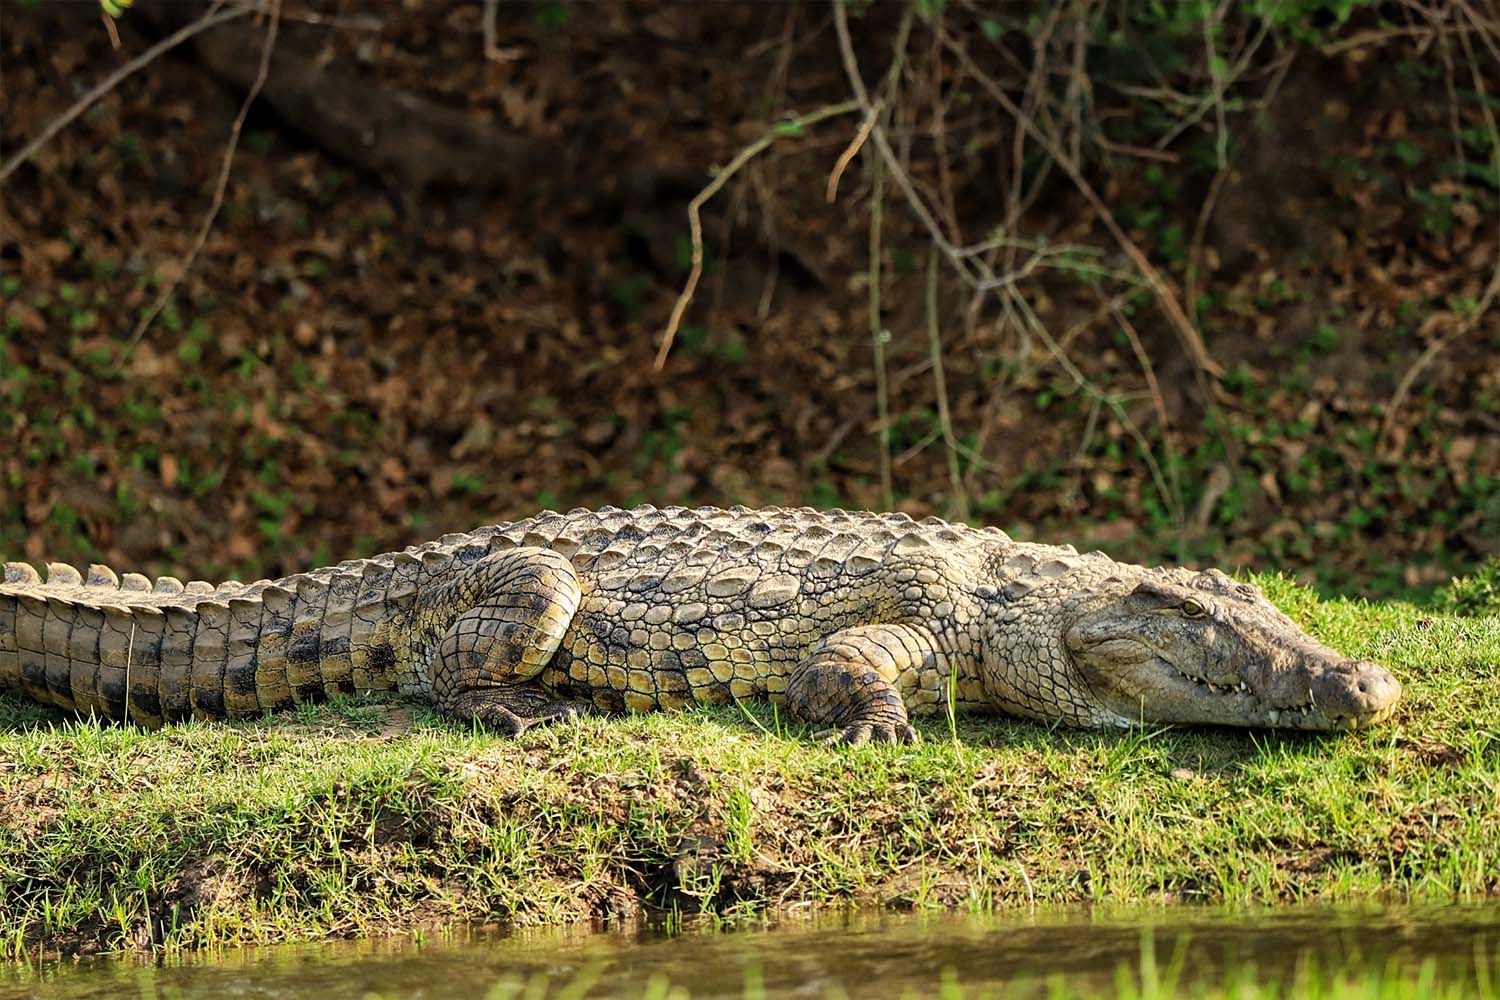 A croc on the river bank